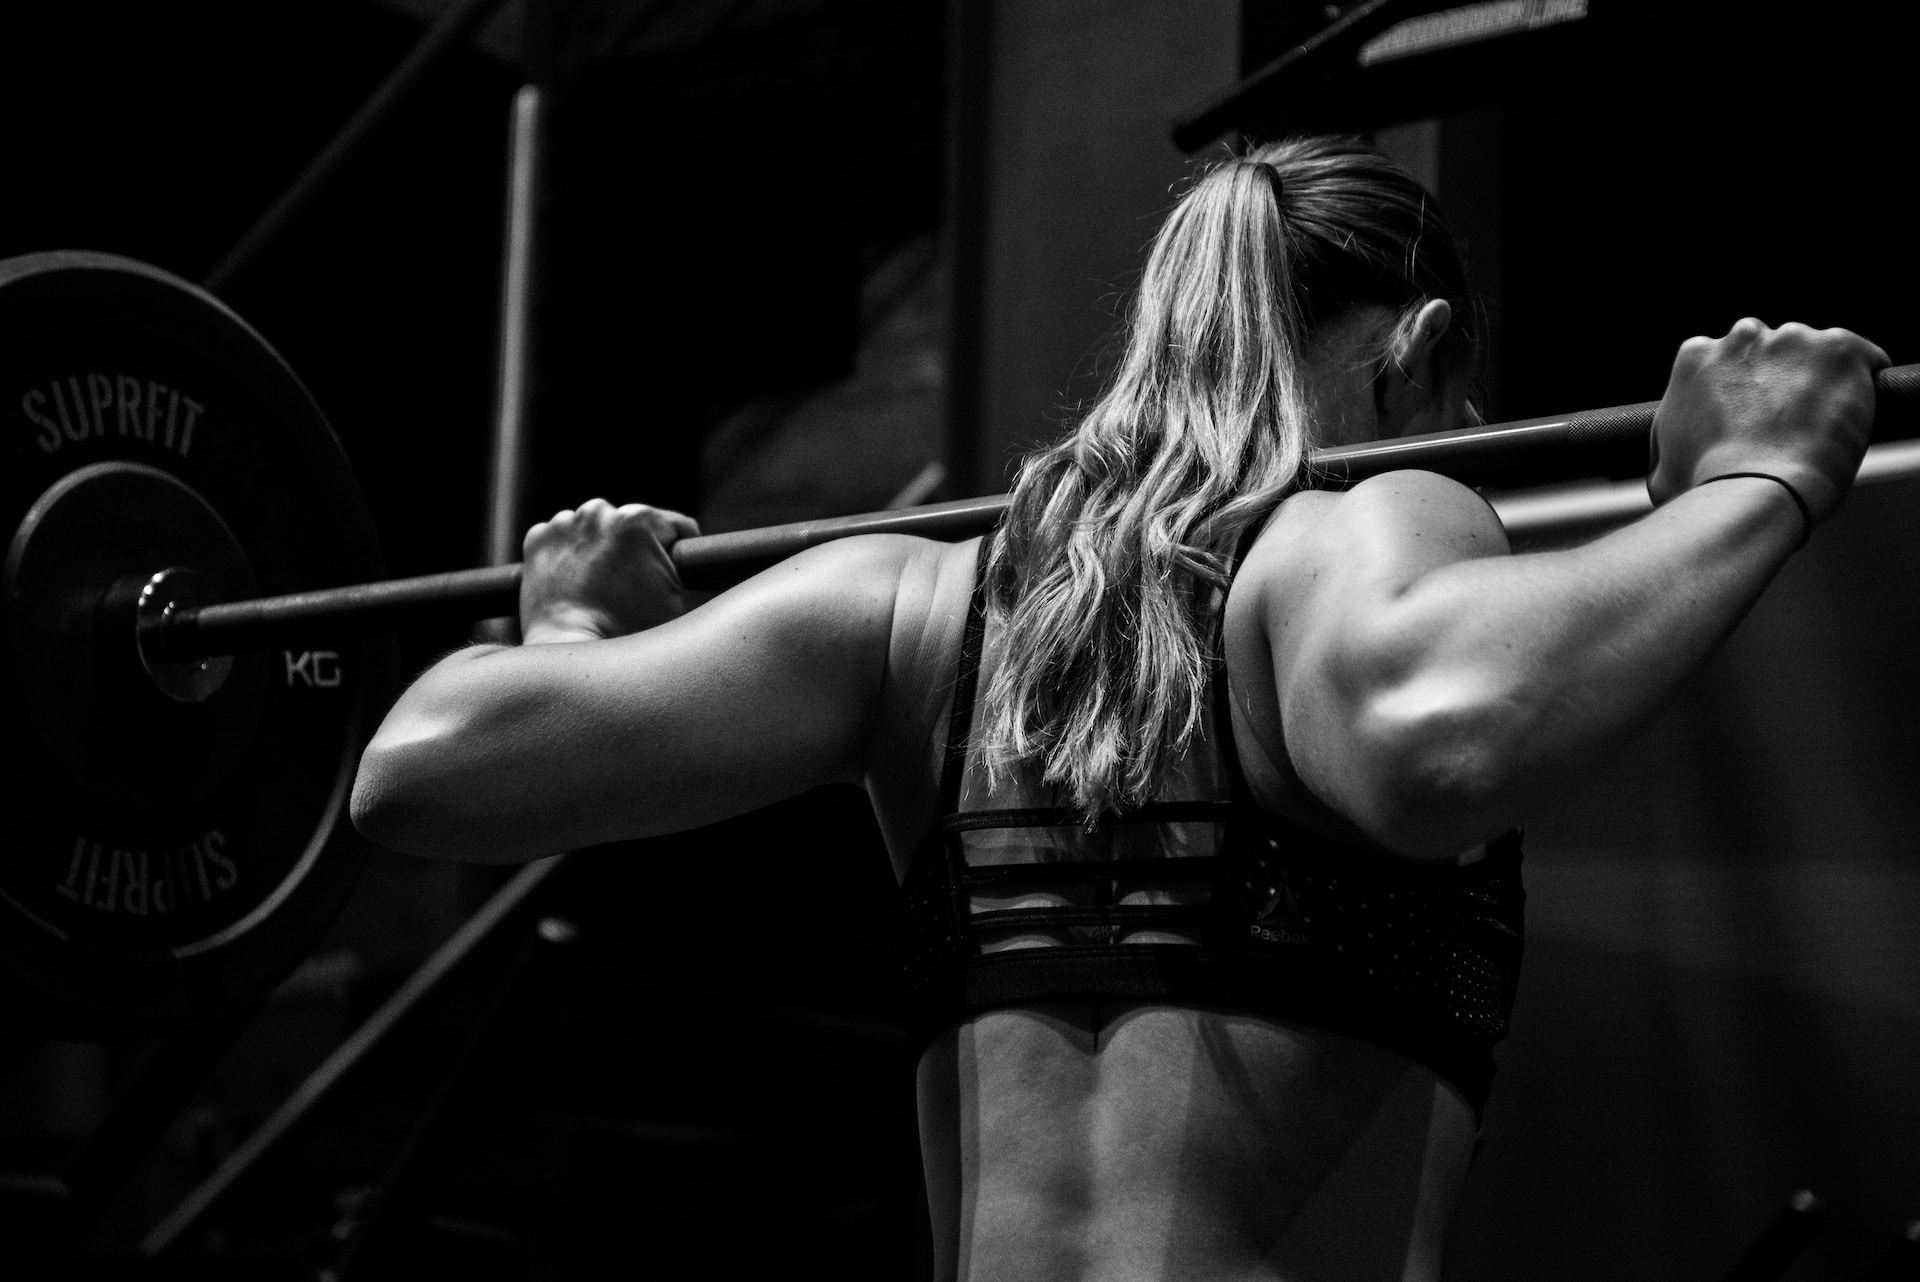 the image shows a female athlete lifting a barbell